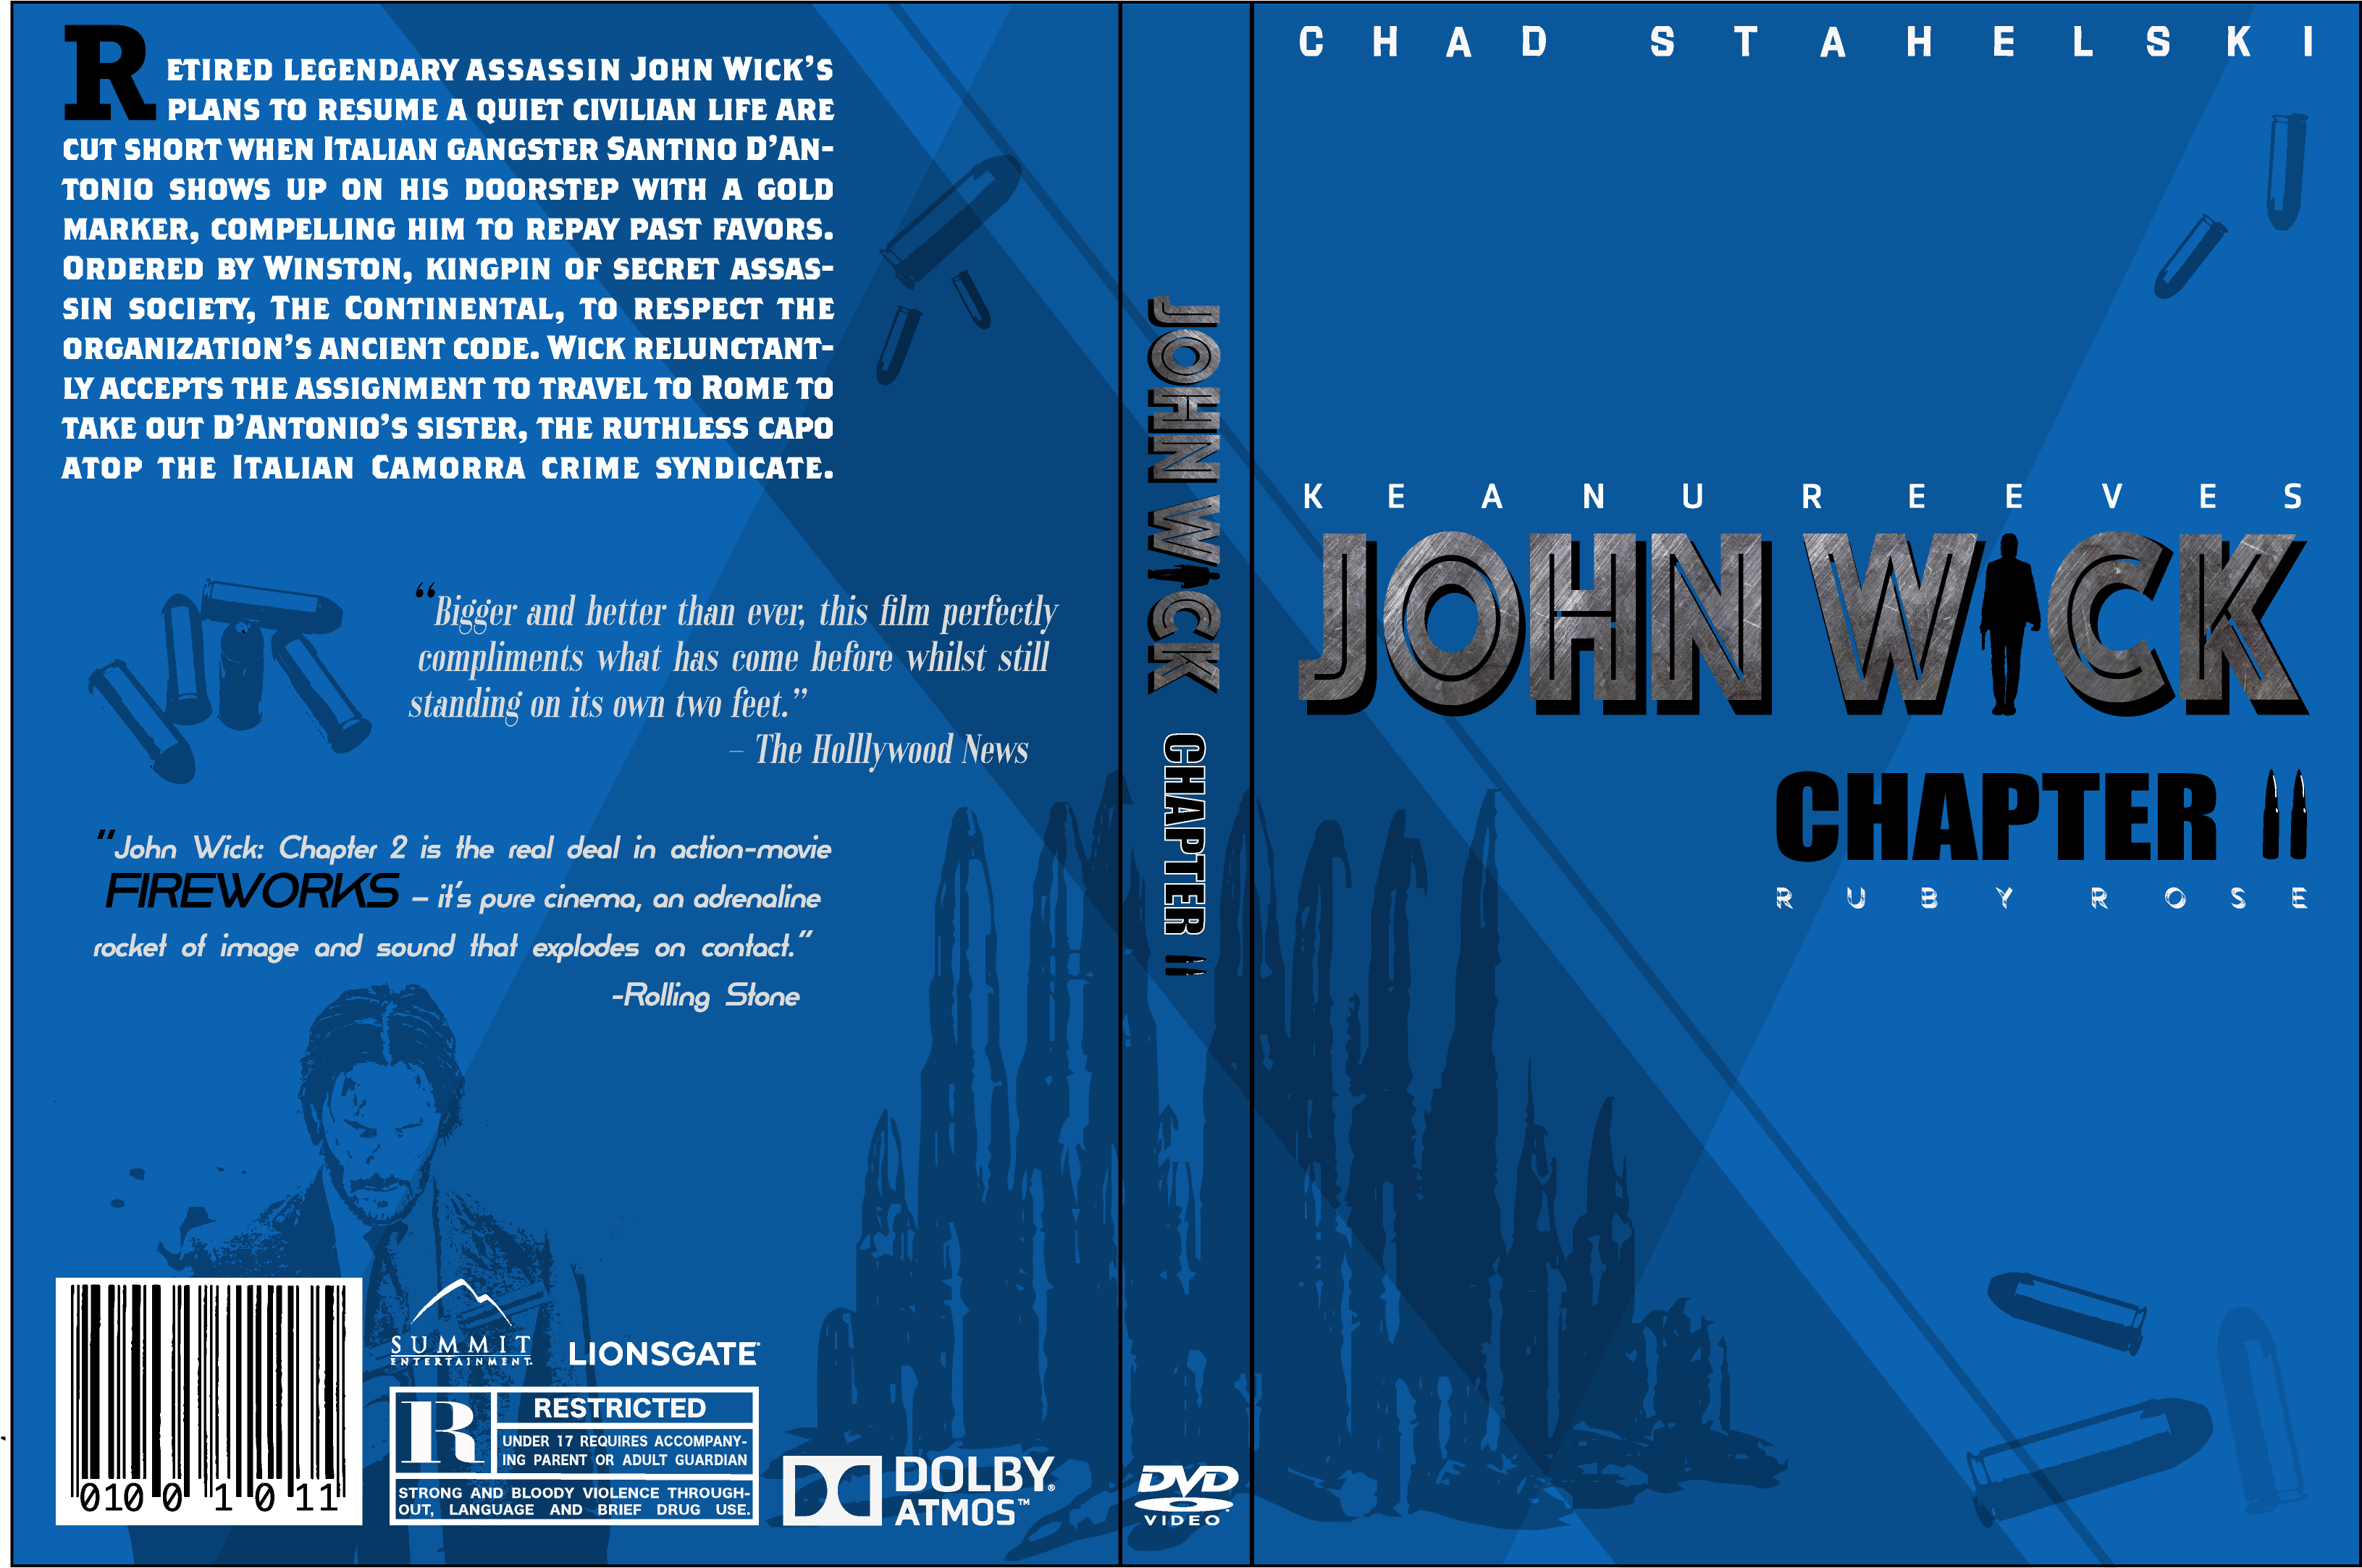 A Blue Cover With Text And Images